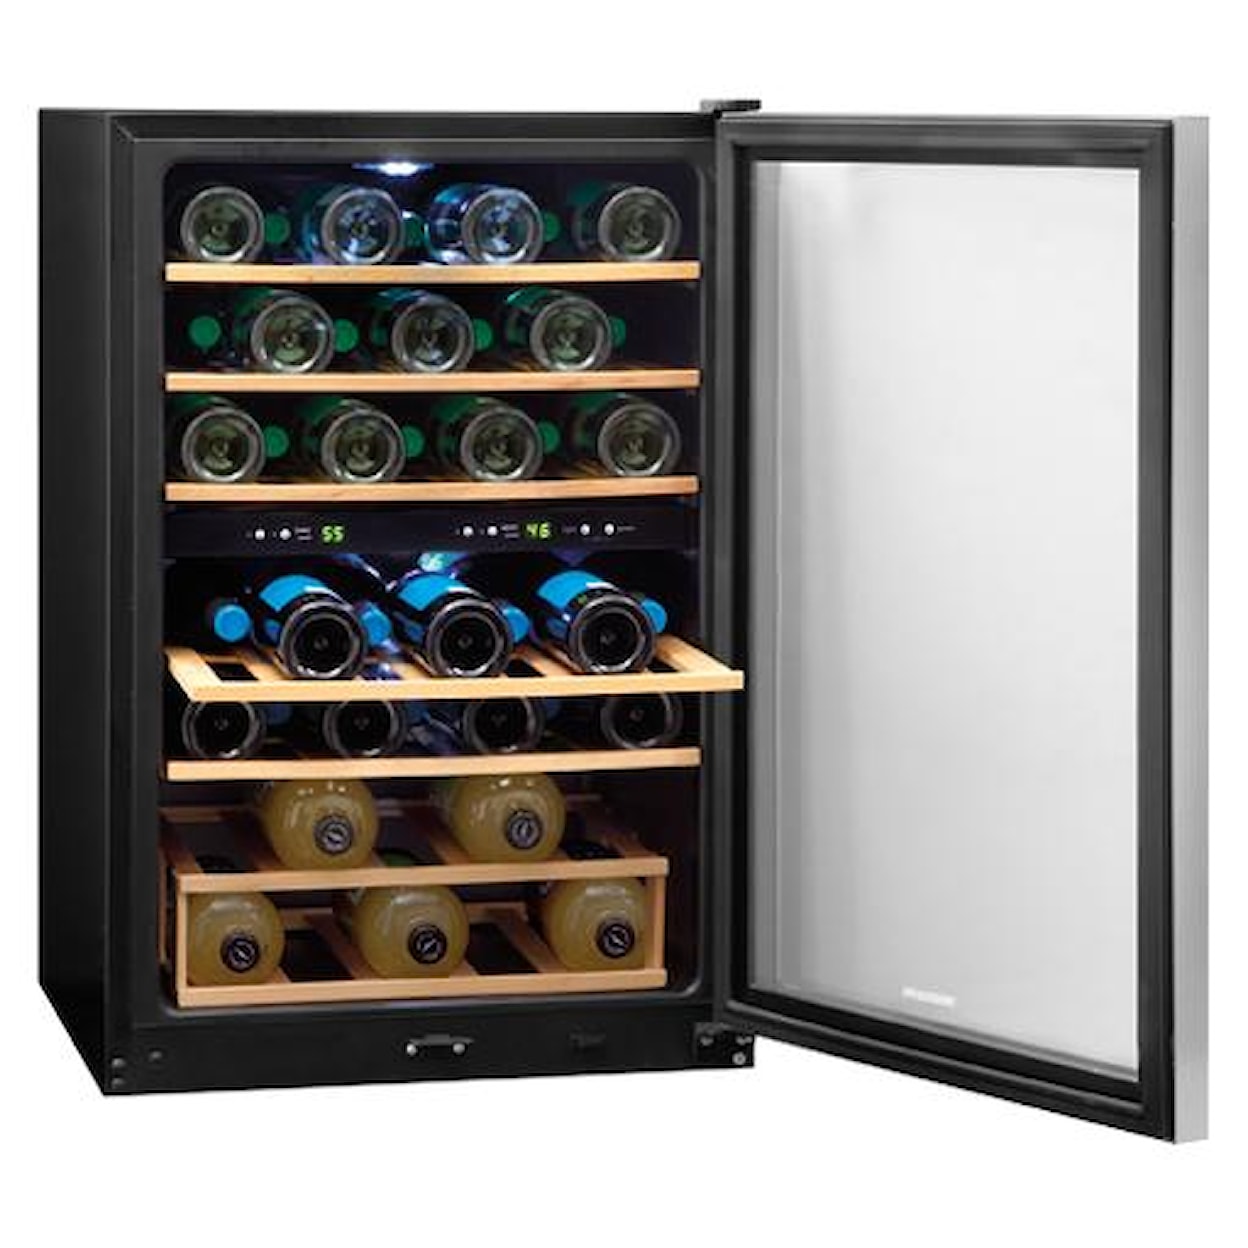 Frigidaire Wine Coolers 38 Bottle Two-Zone Wine Cooler